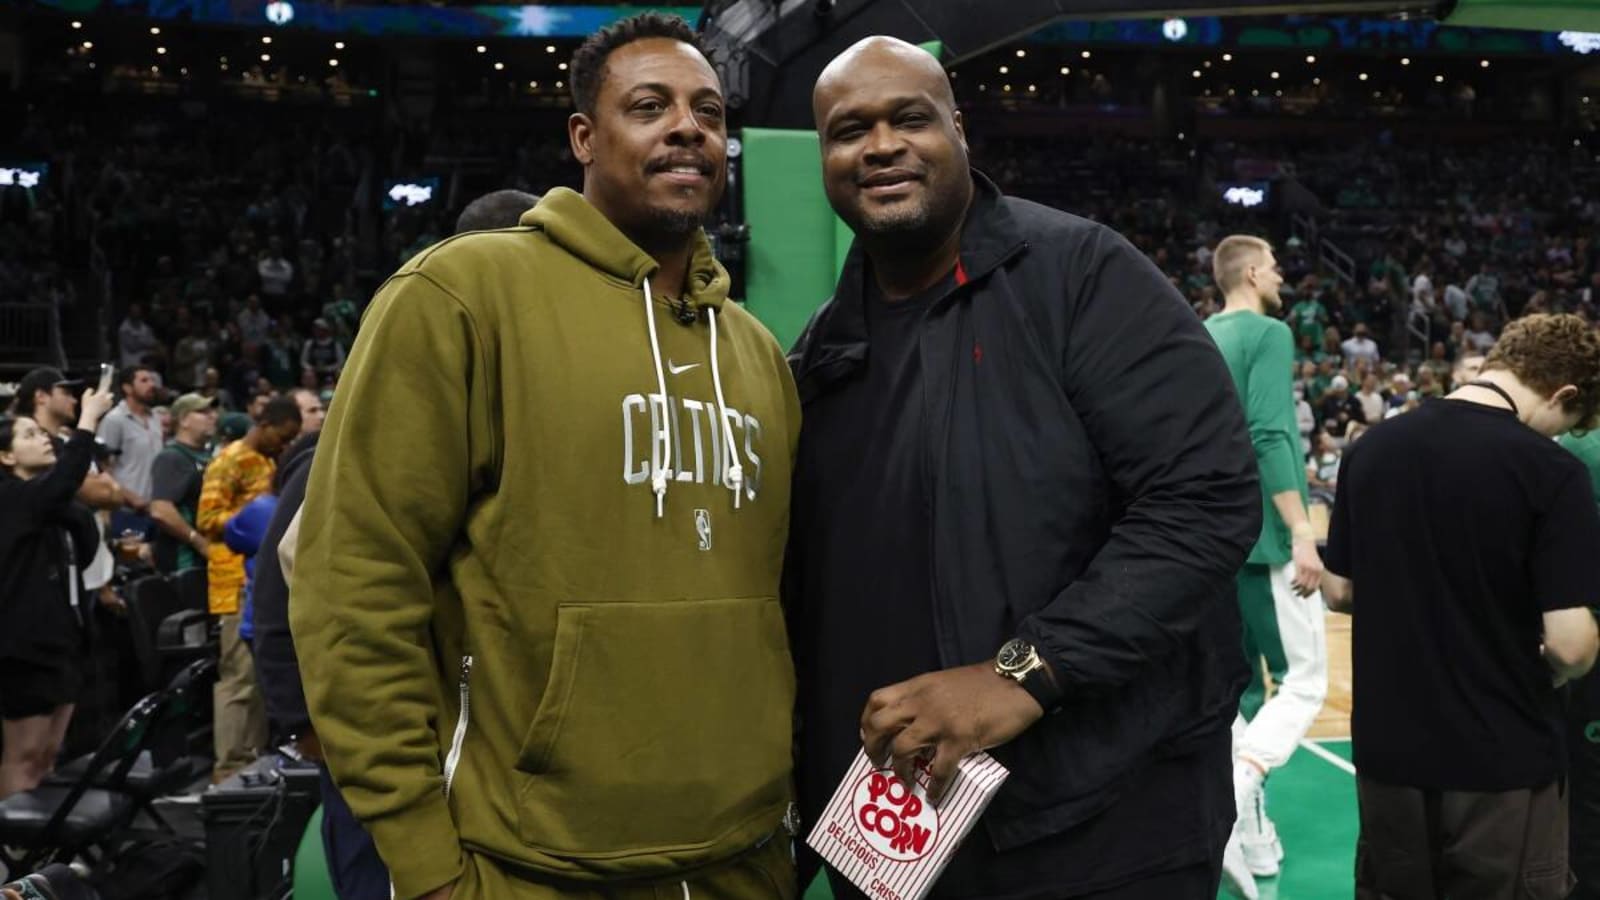 Paul Pierce recalls his experience meeting Michael Jordan for the first time